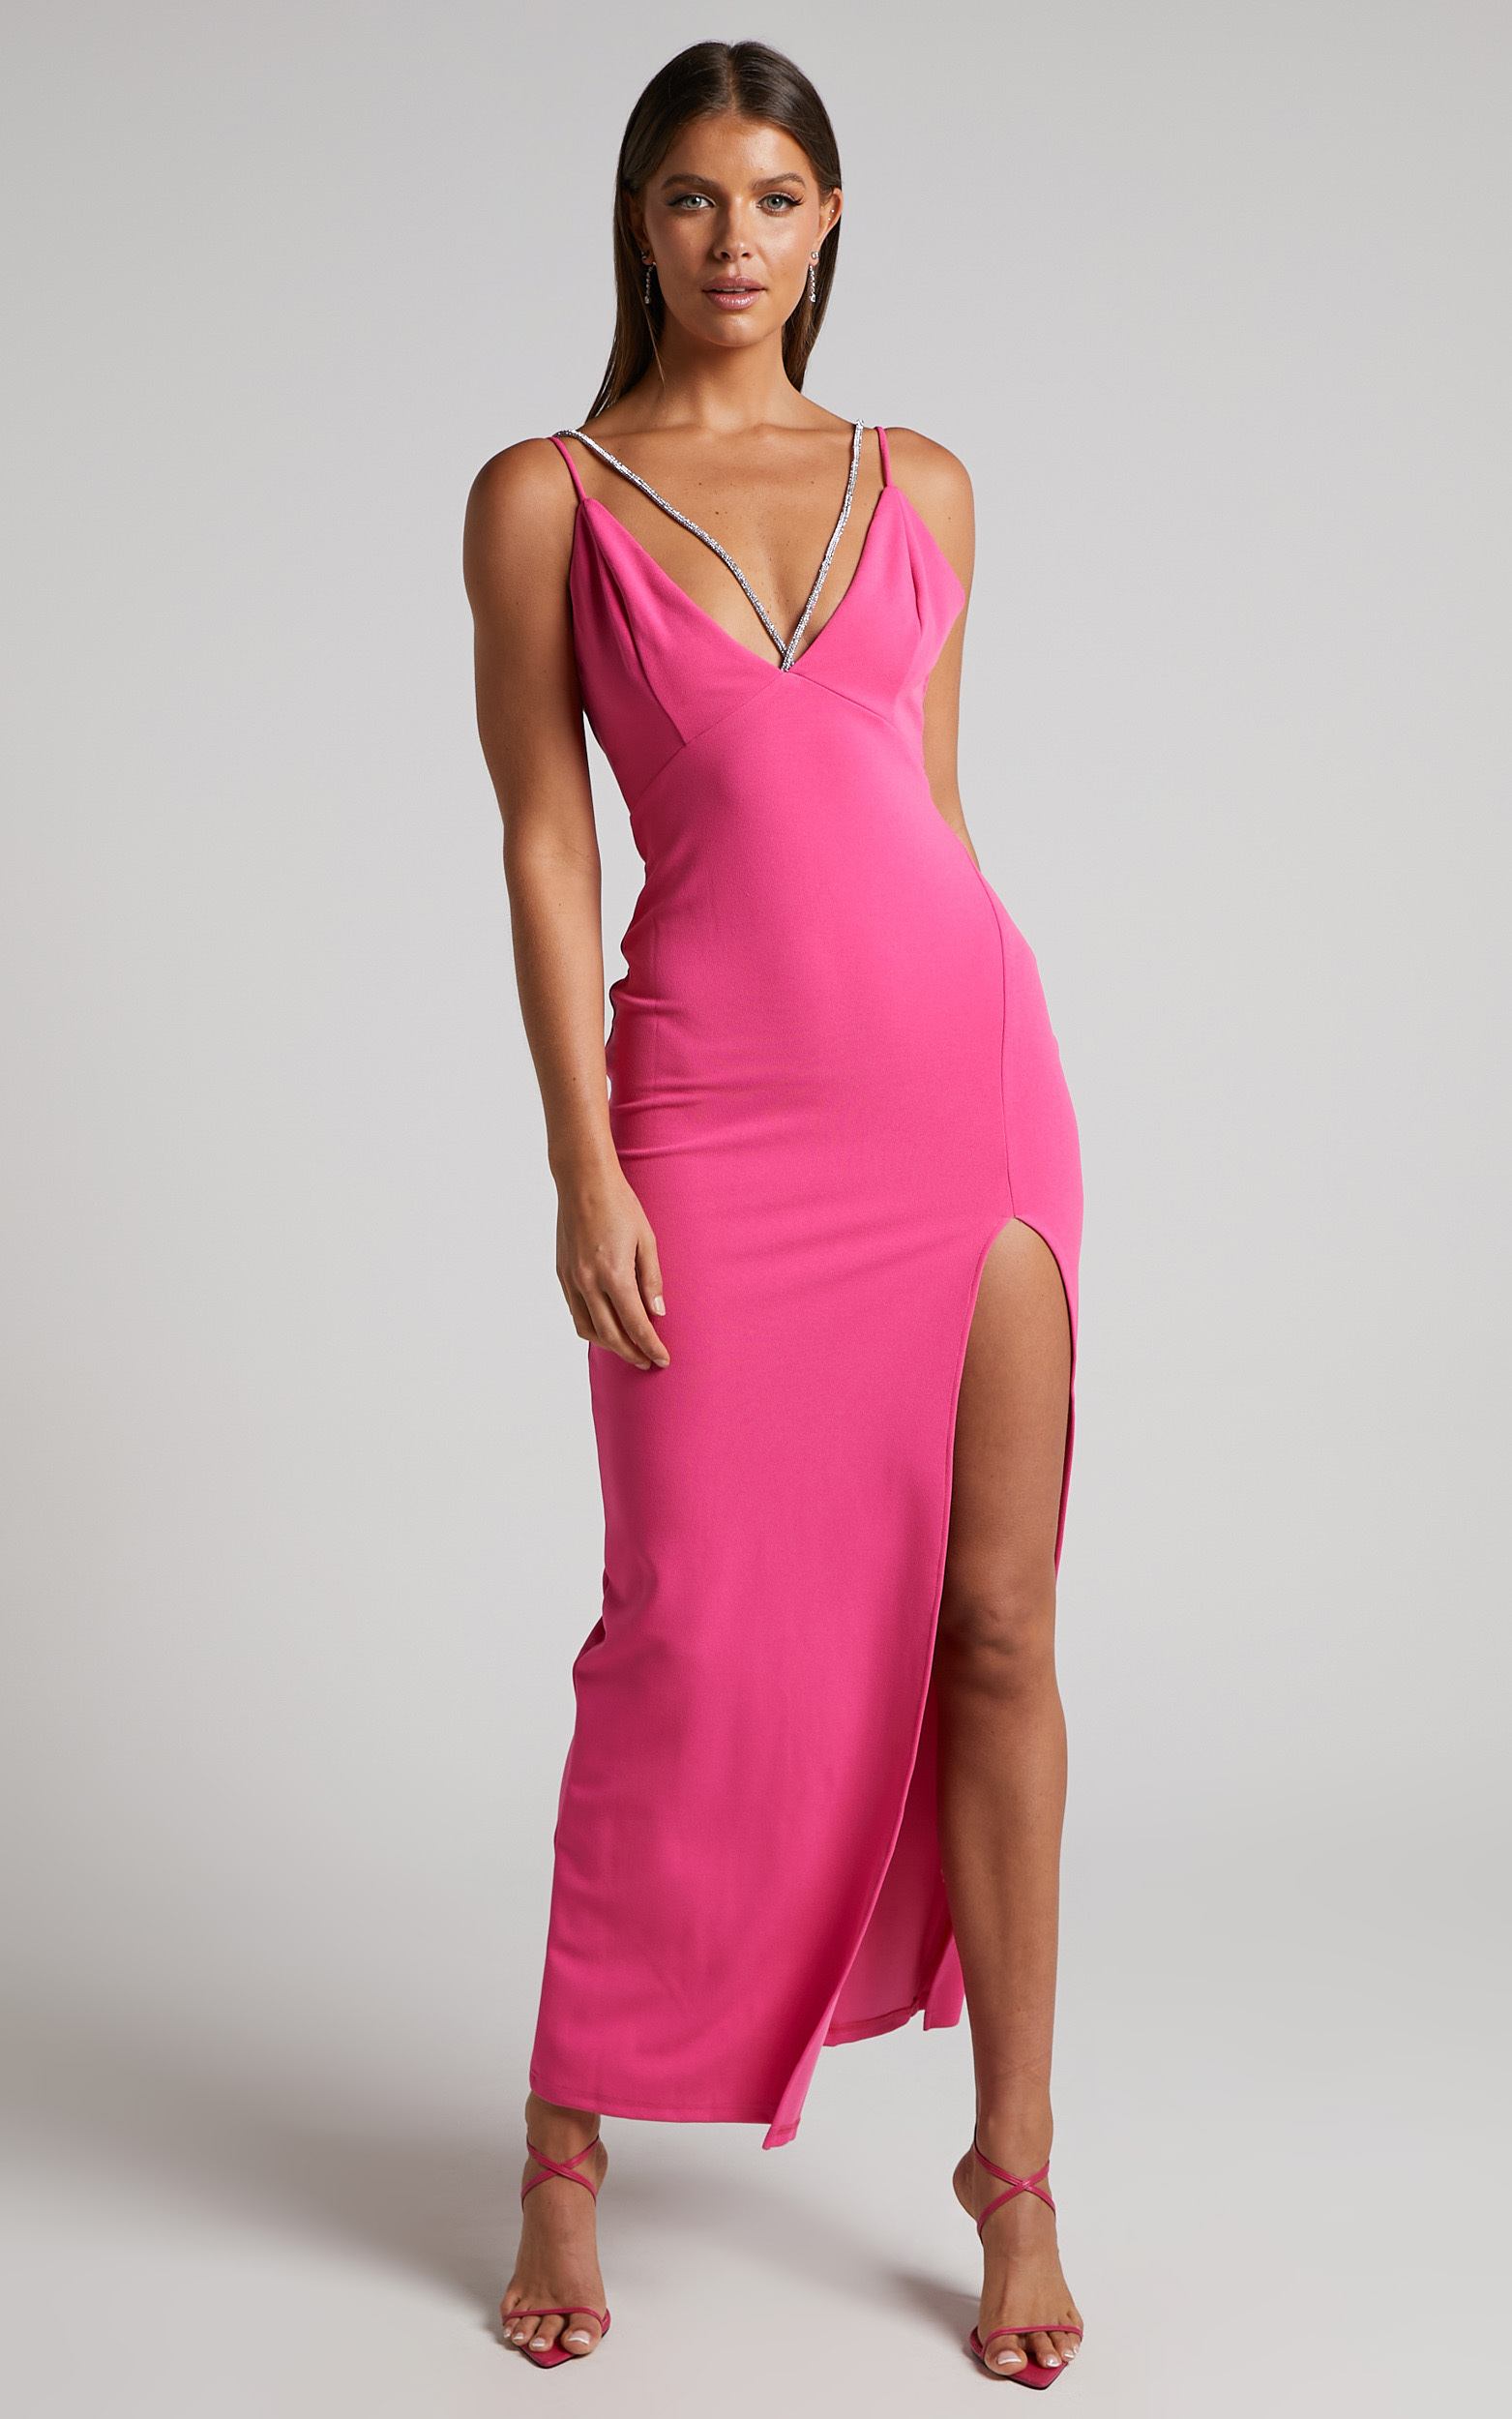 Charity Maxi Dress - Diamante Strap Detail Plunge Dress in Hot Pink - 04, PNK1, hi-res image number null